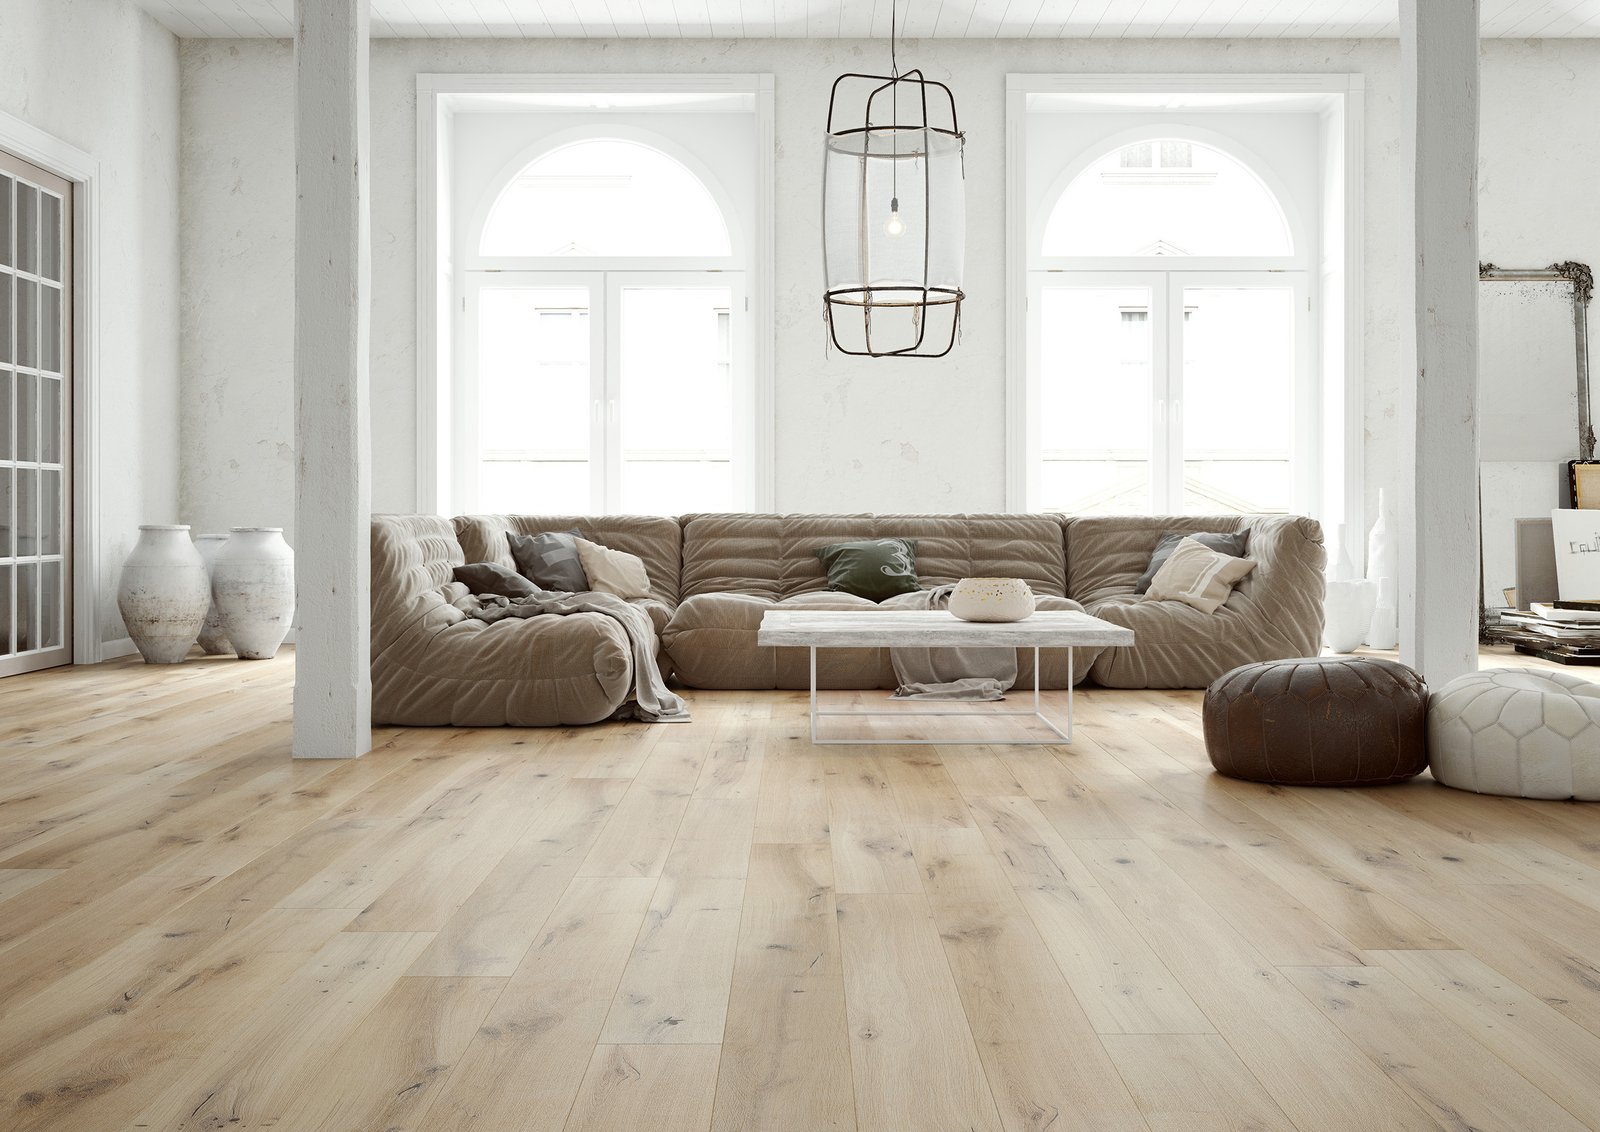 Opt-for-Light-Colored-Flooring